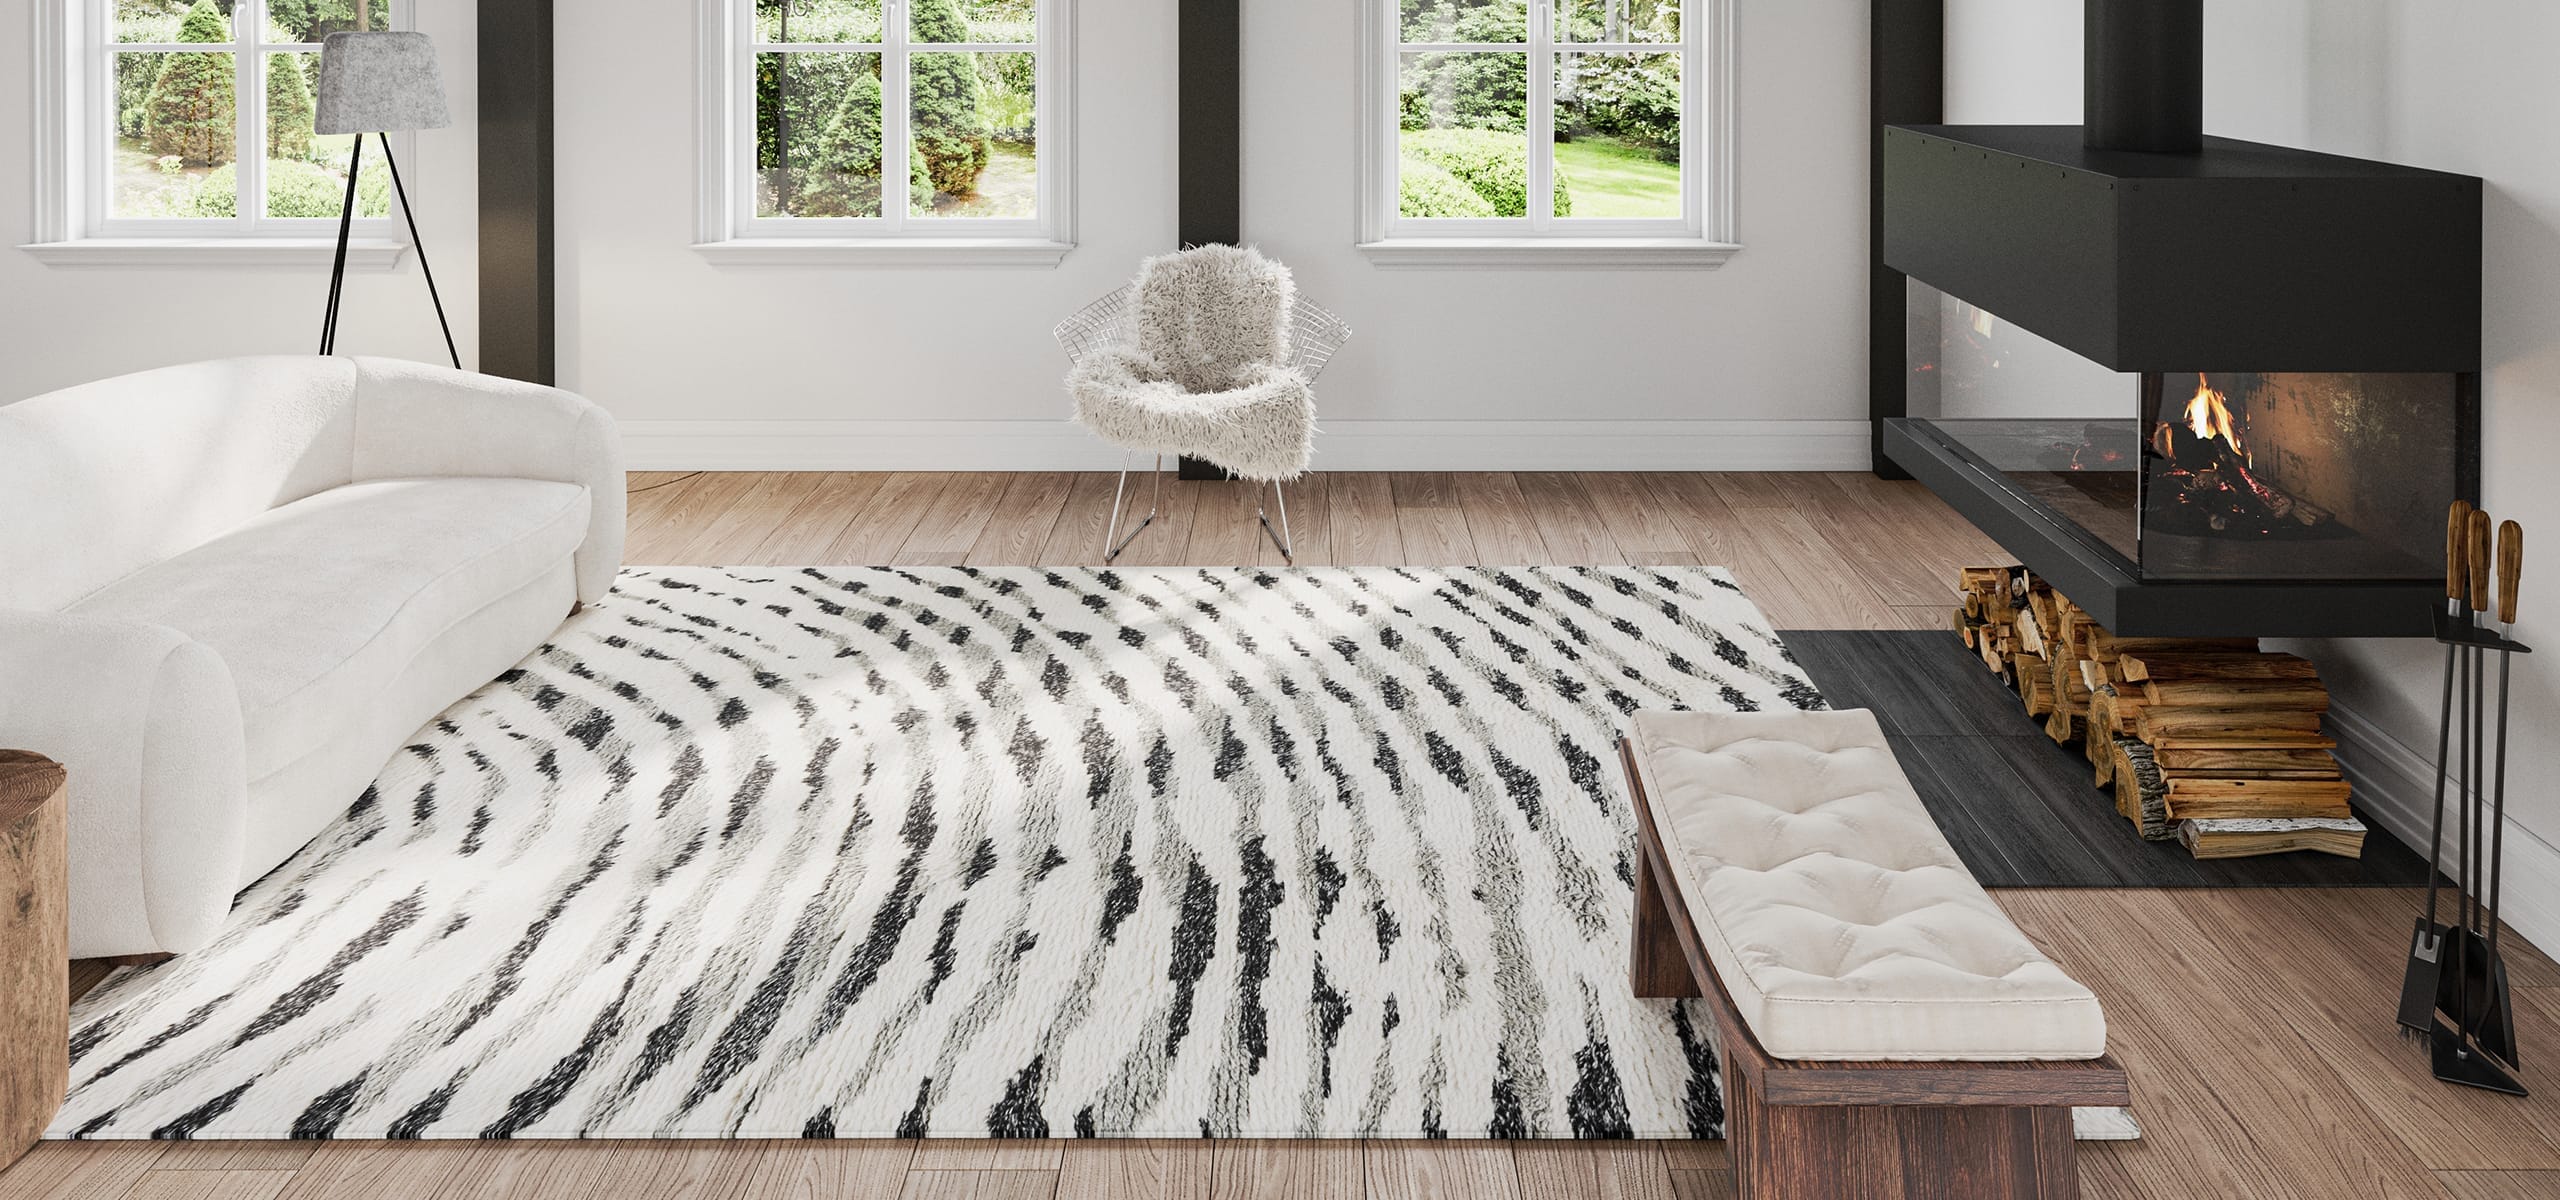 Rugs For Small Spaces  Discover Rugs to Make a Room Look Bigger